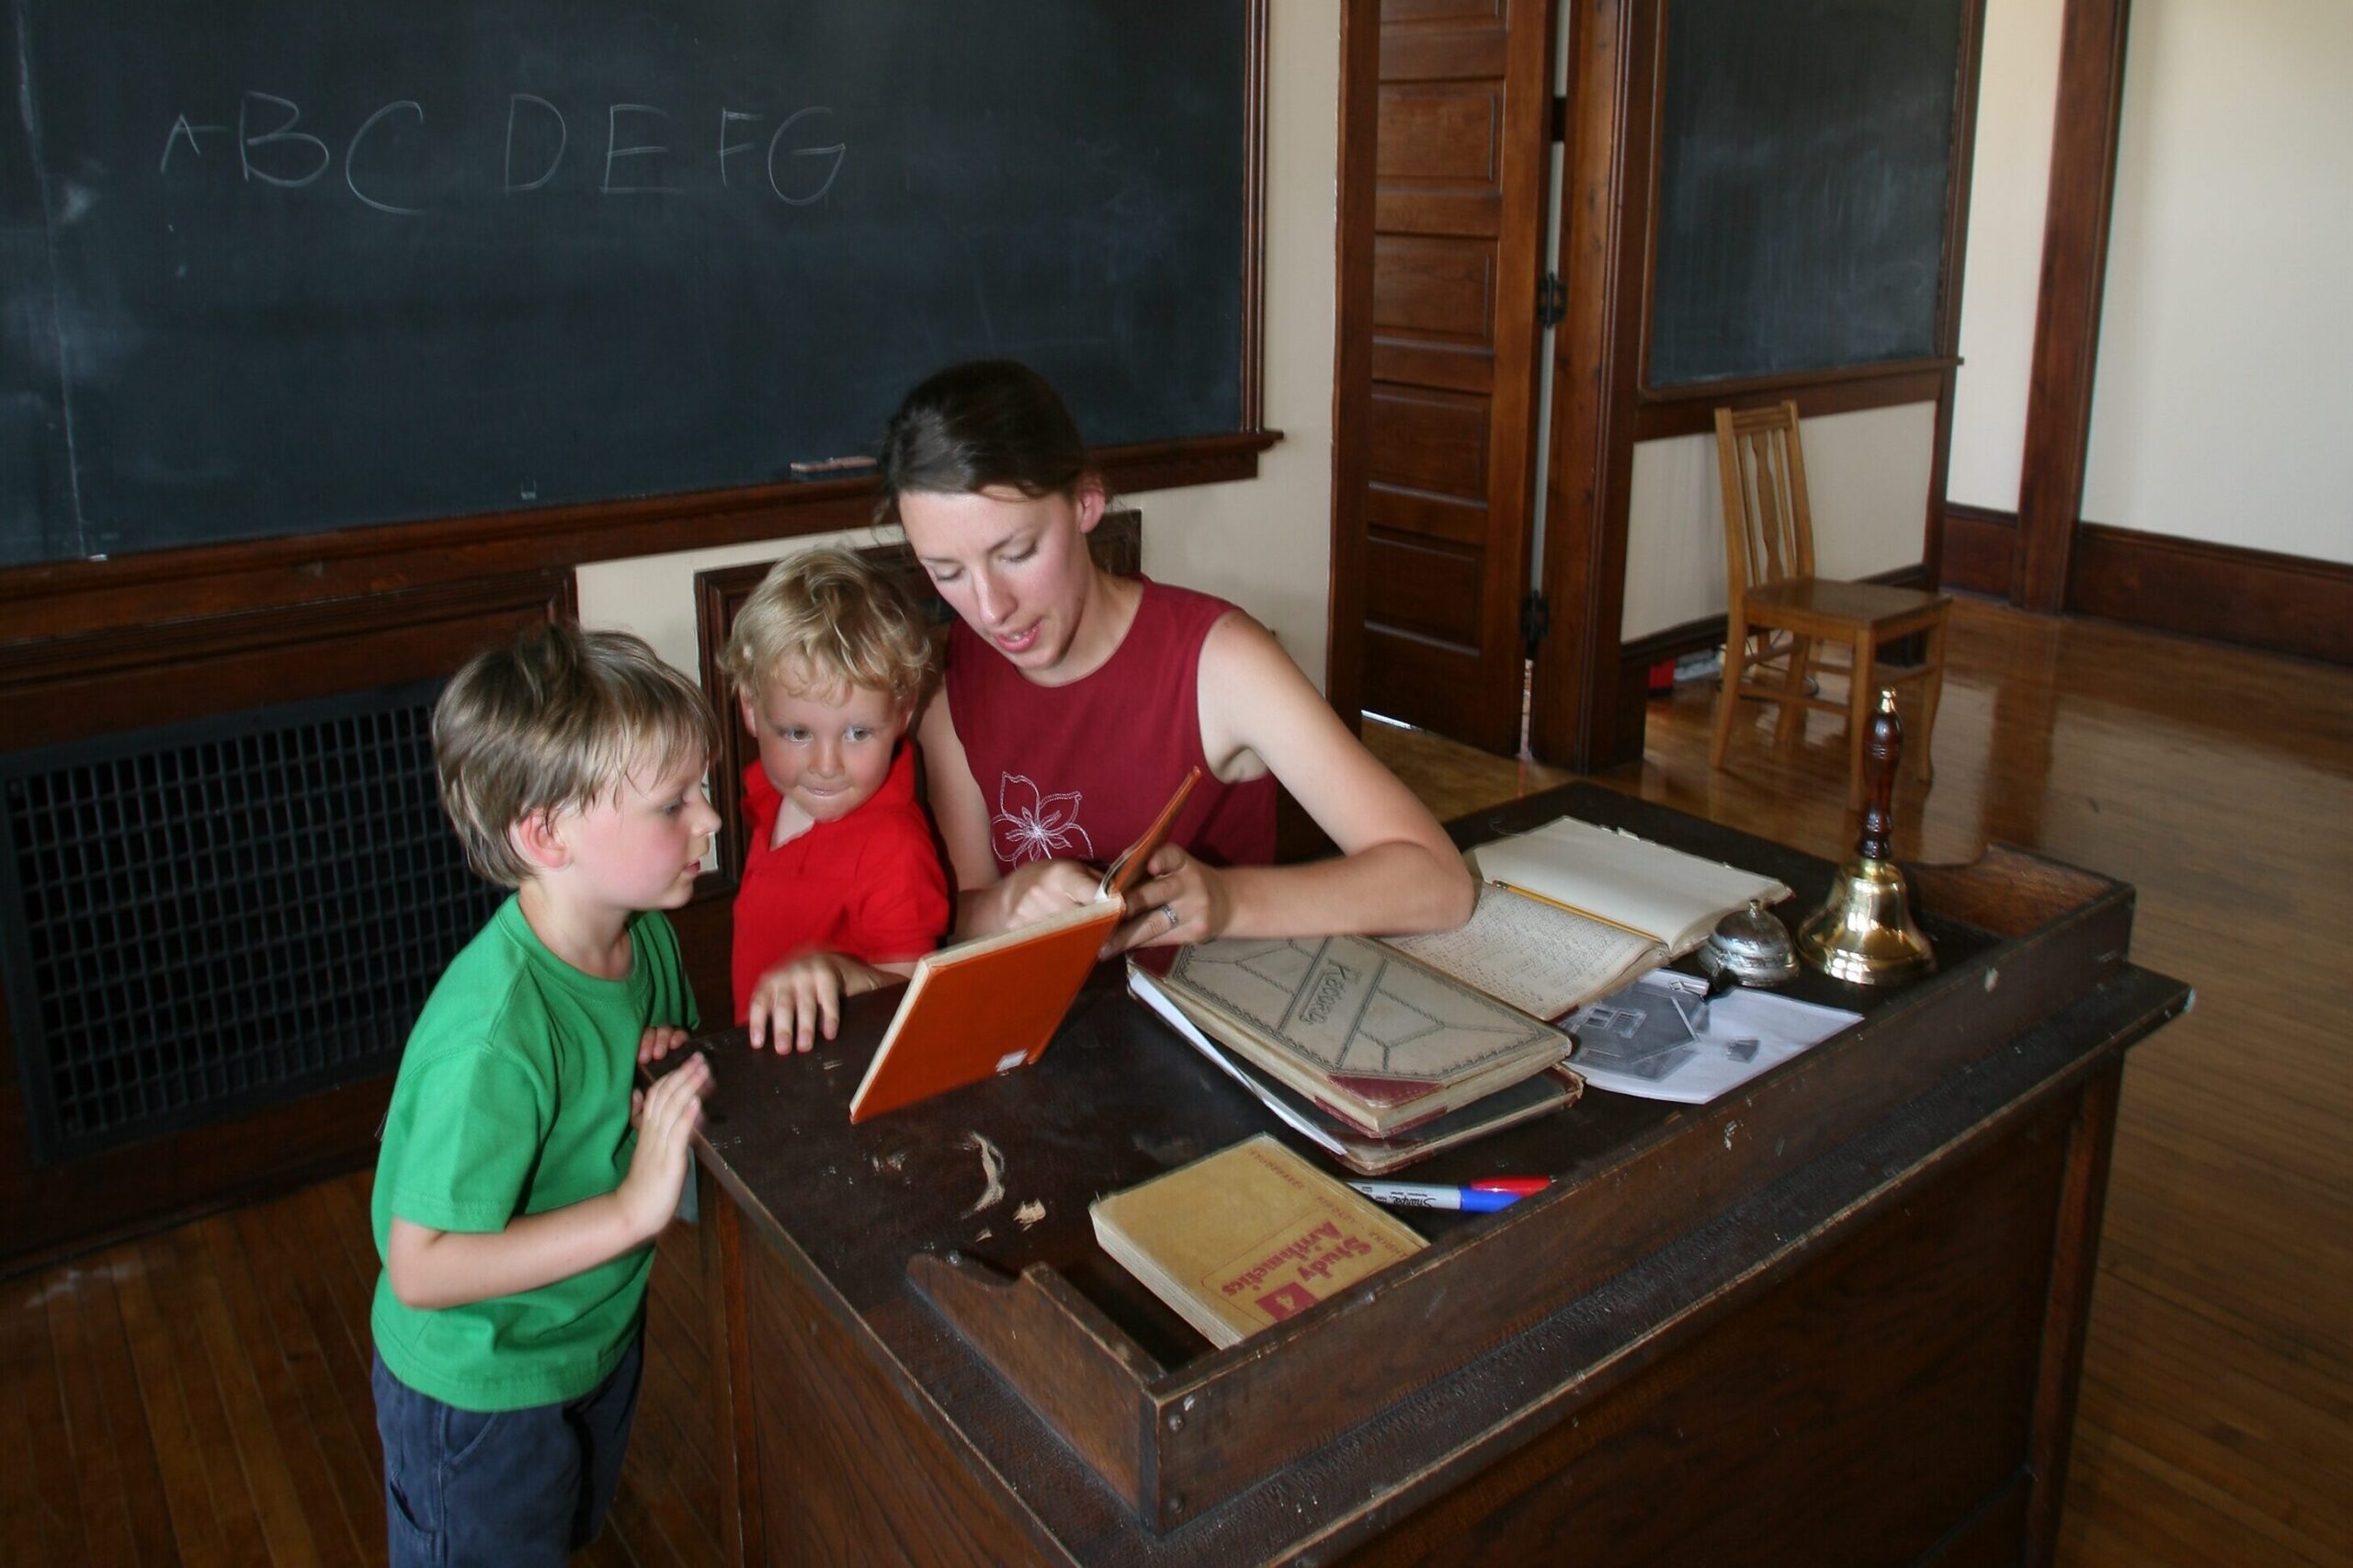 two boys looking at a book while their mother points at something